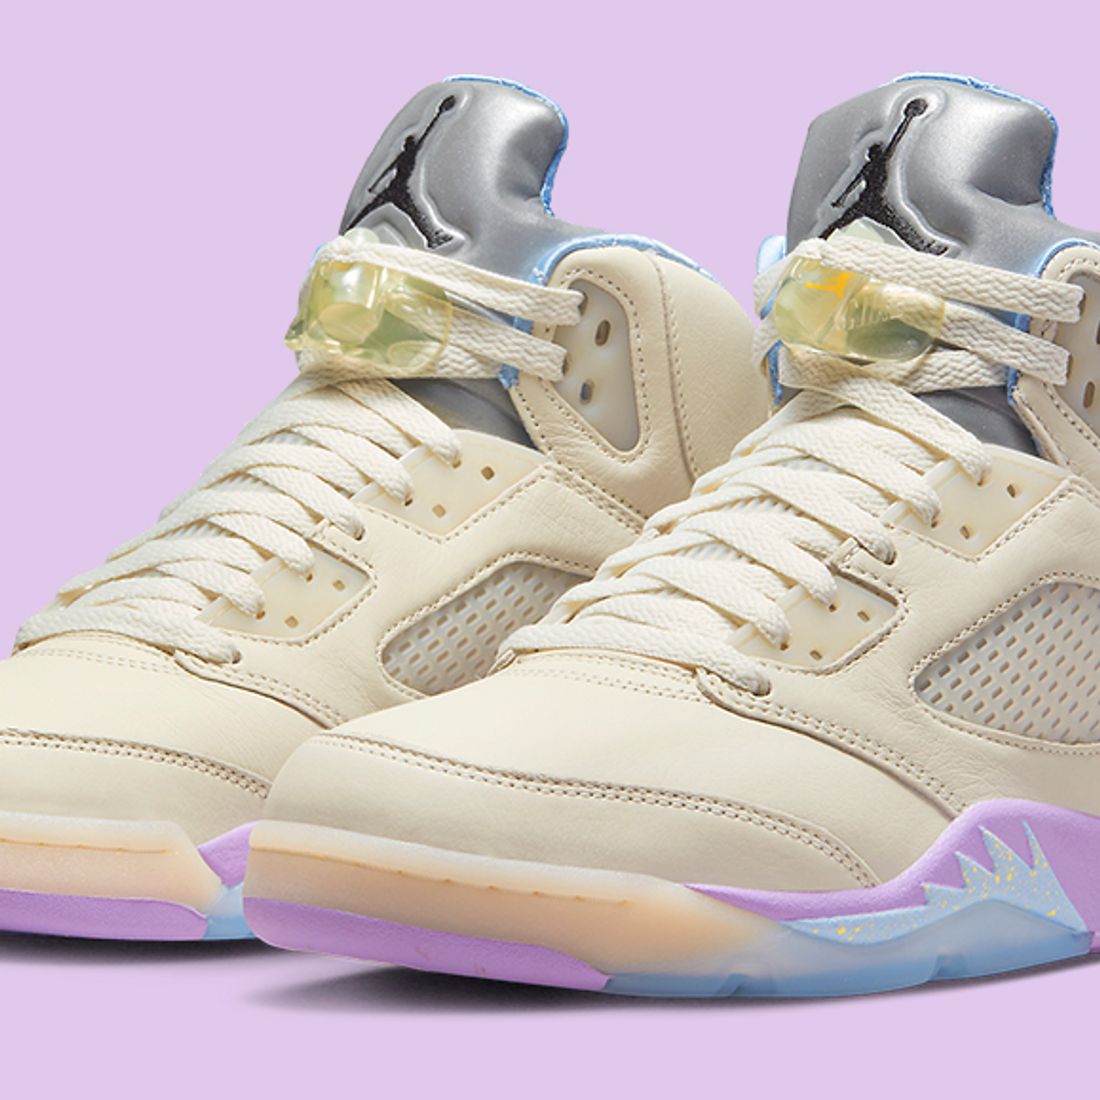 Clothing to Match the Off White Jordan 5